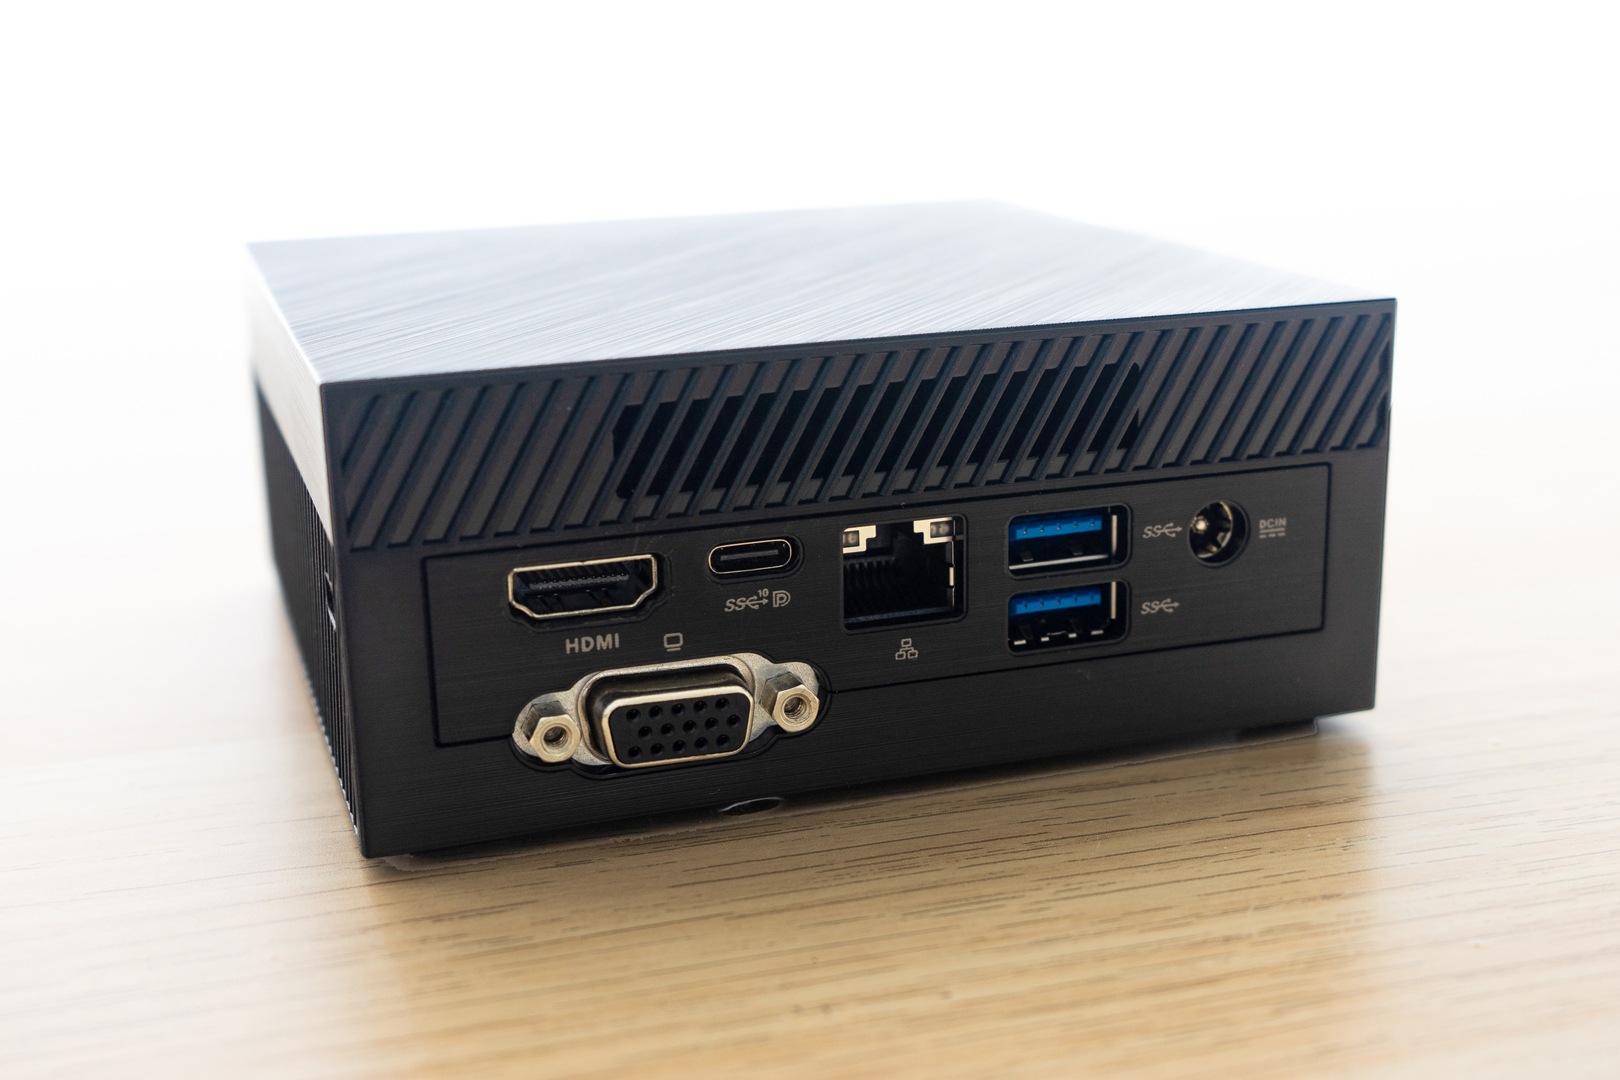 Asus Mini PC PN50 review: The perfect PC for cramped spaces